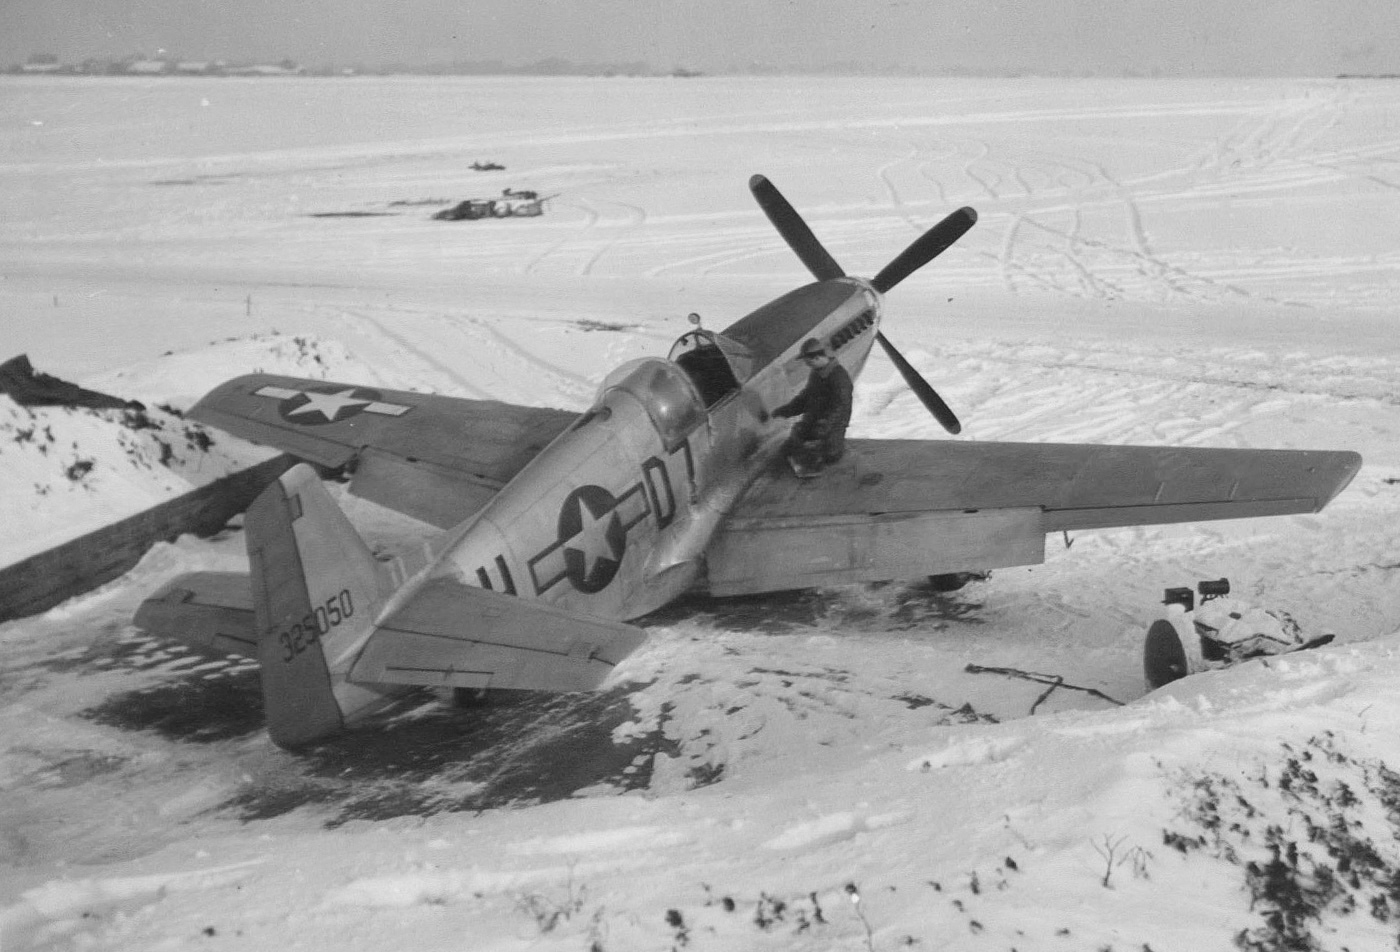 p-51 in the snow in england